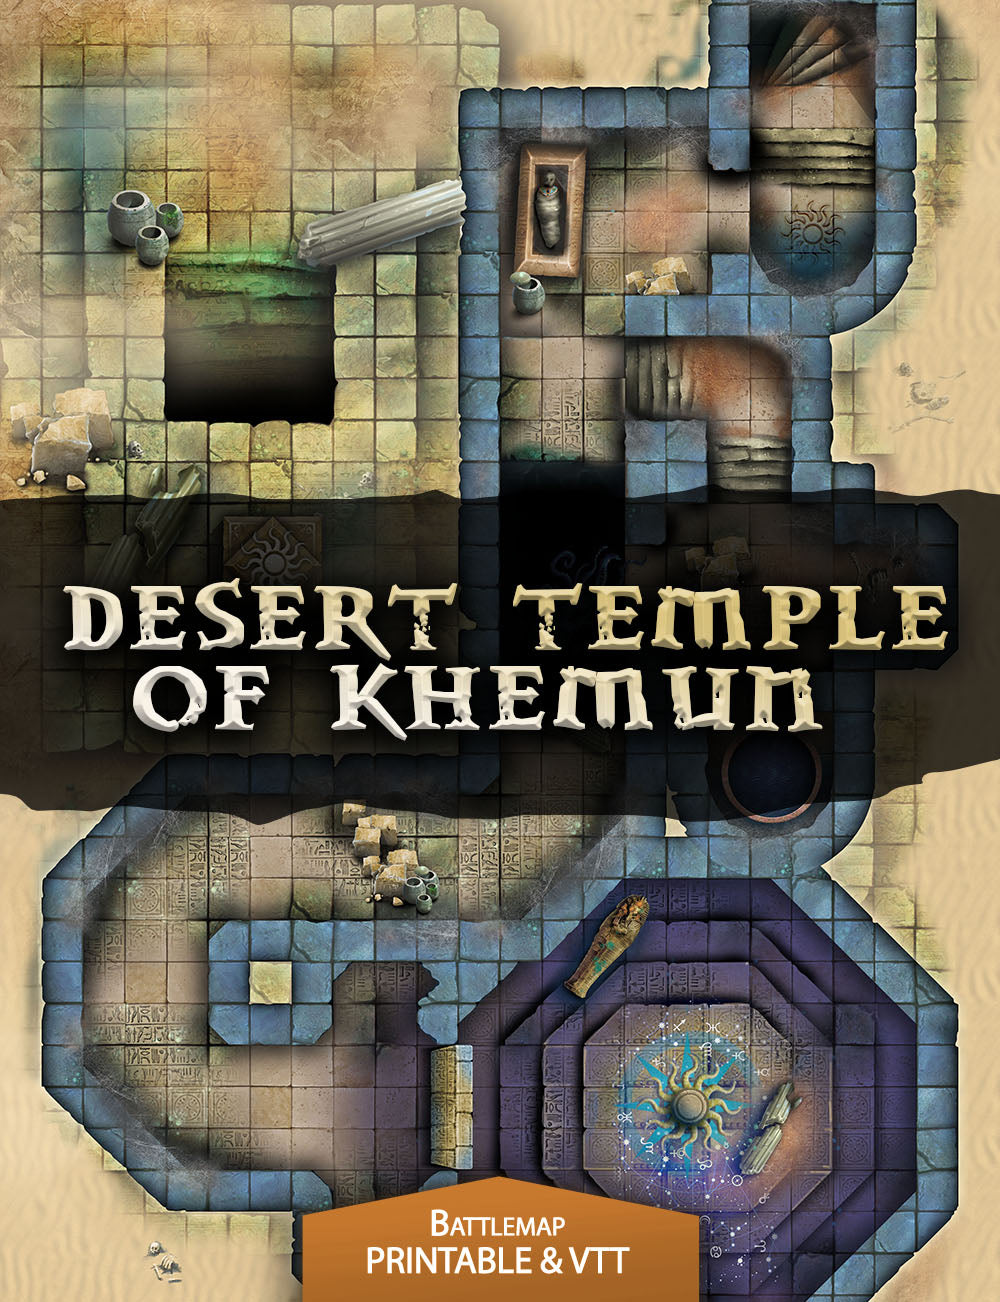 Desert Temple Khemun is a free d&d map - Egyptian d&d dungeon map. Print and Play or use in VTT such as Roll20, Fantasy Grounds